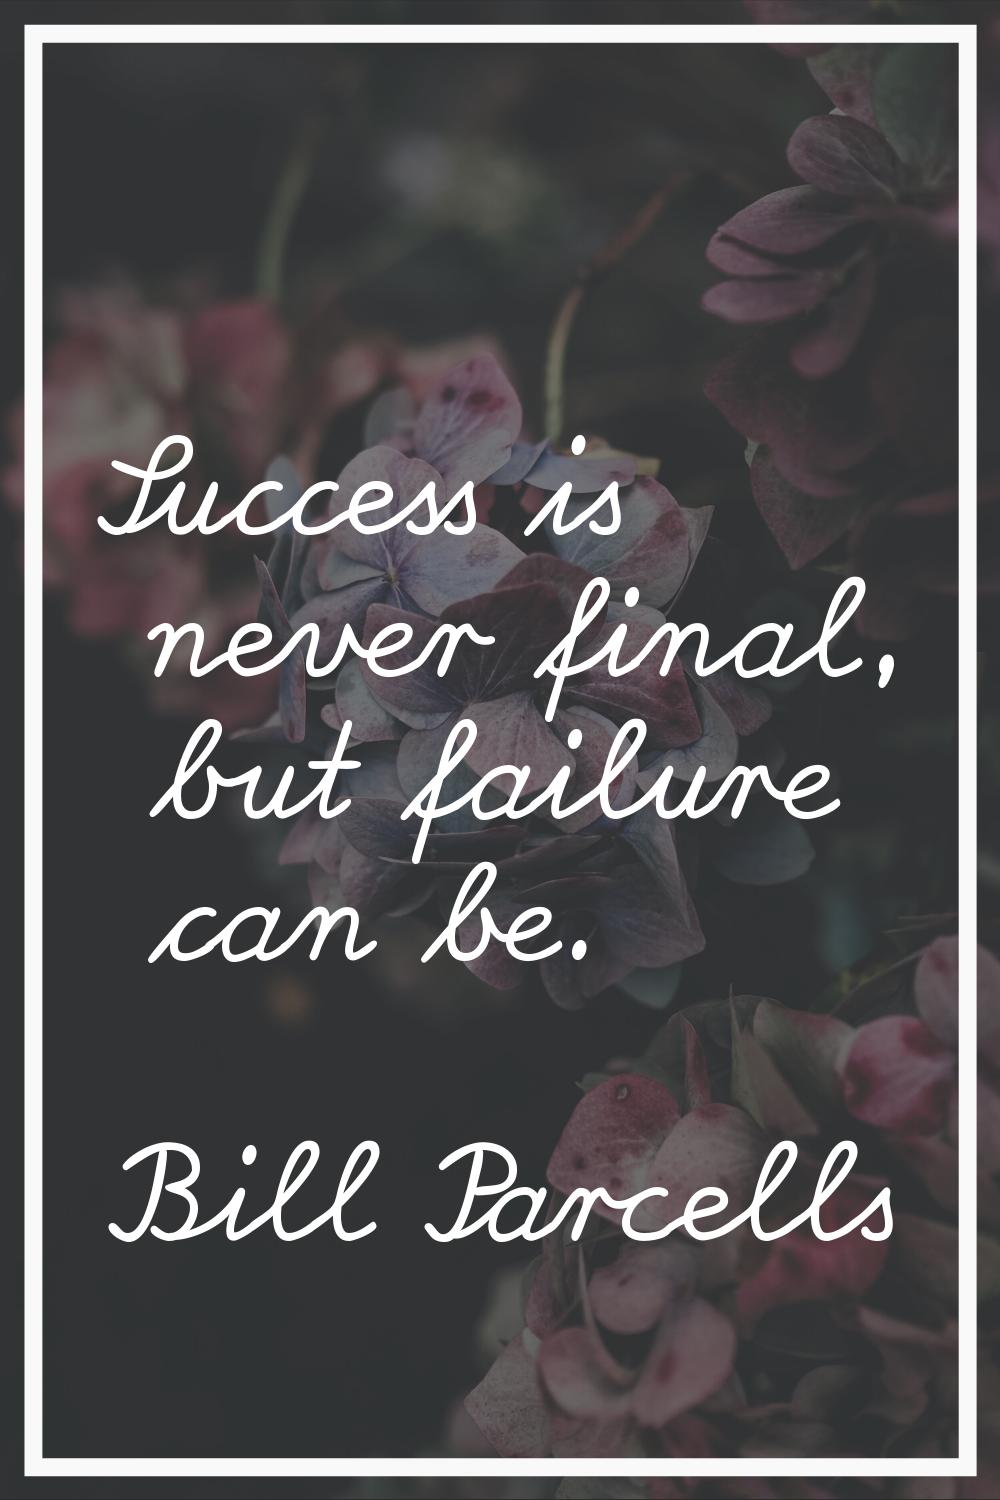 Success is never final, but failure can be.